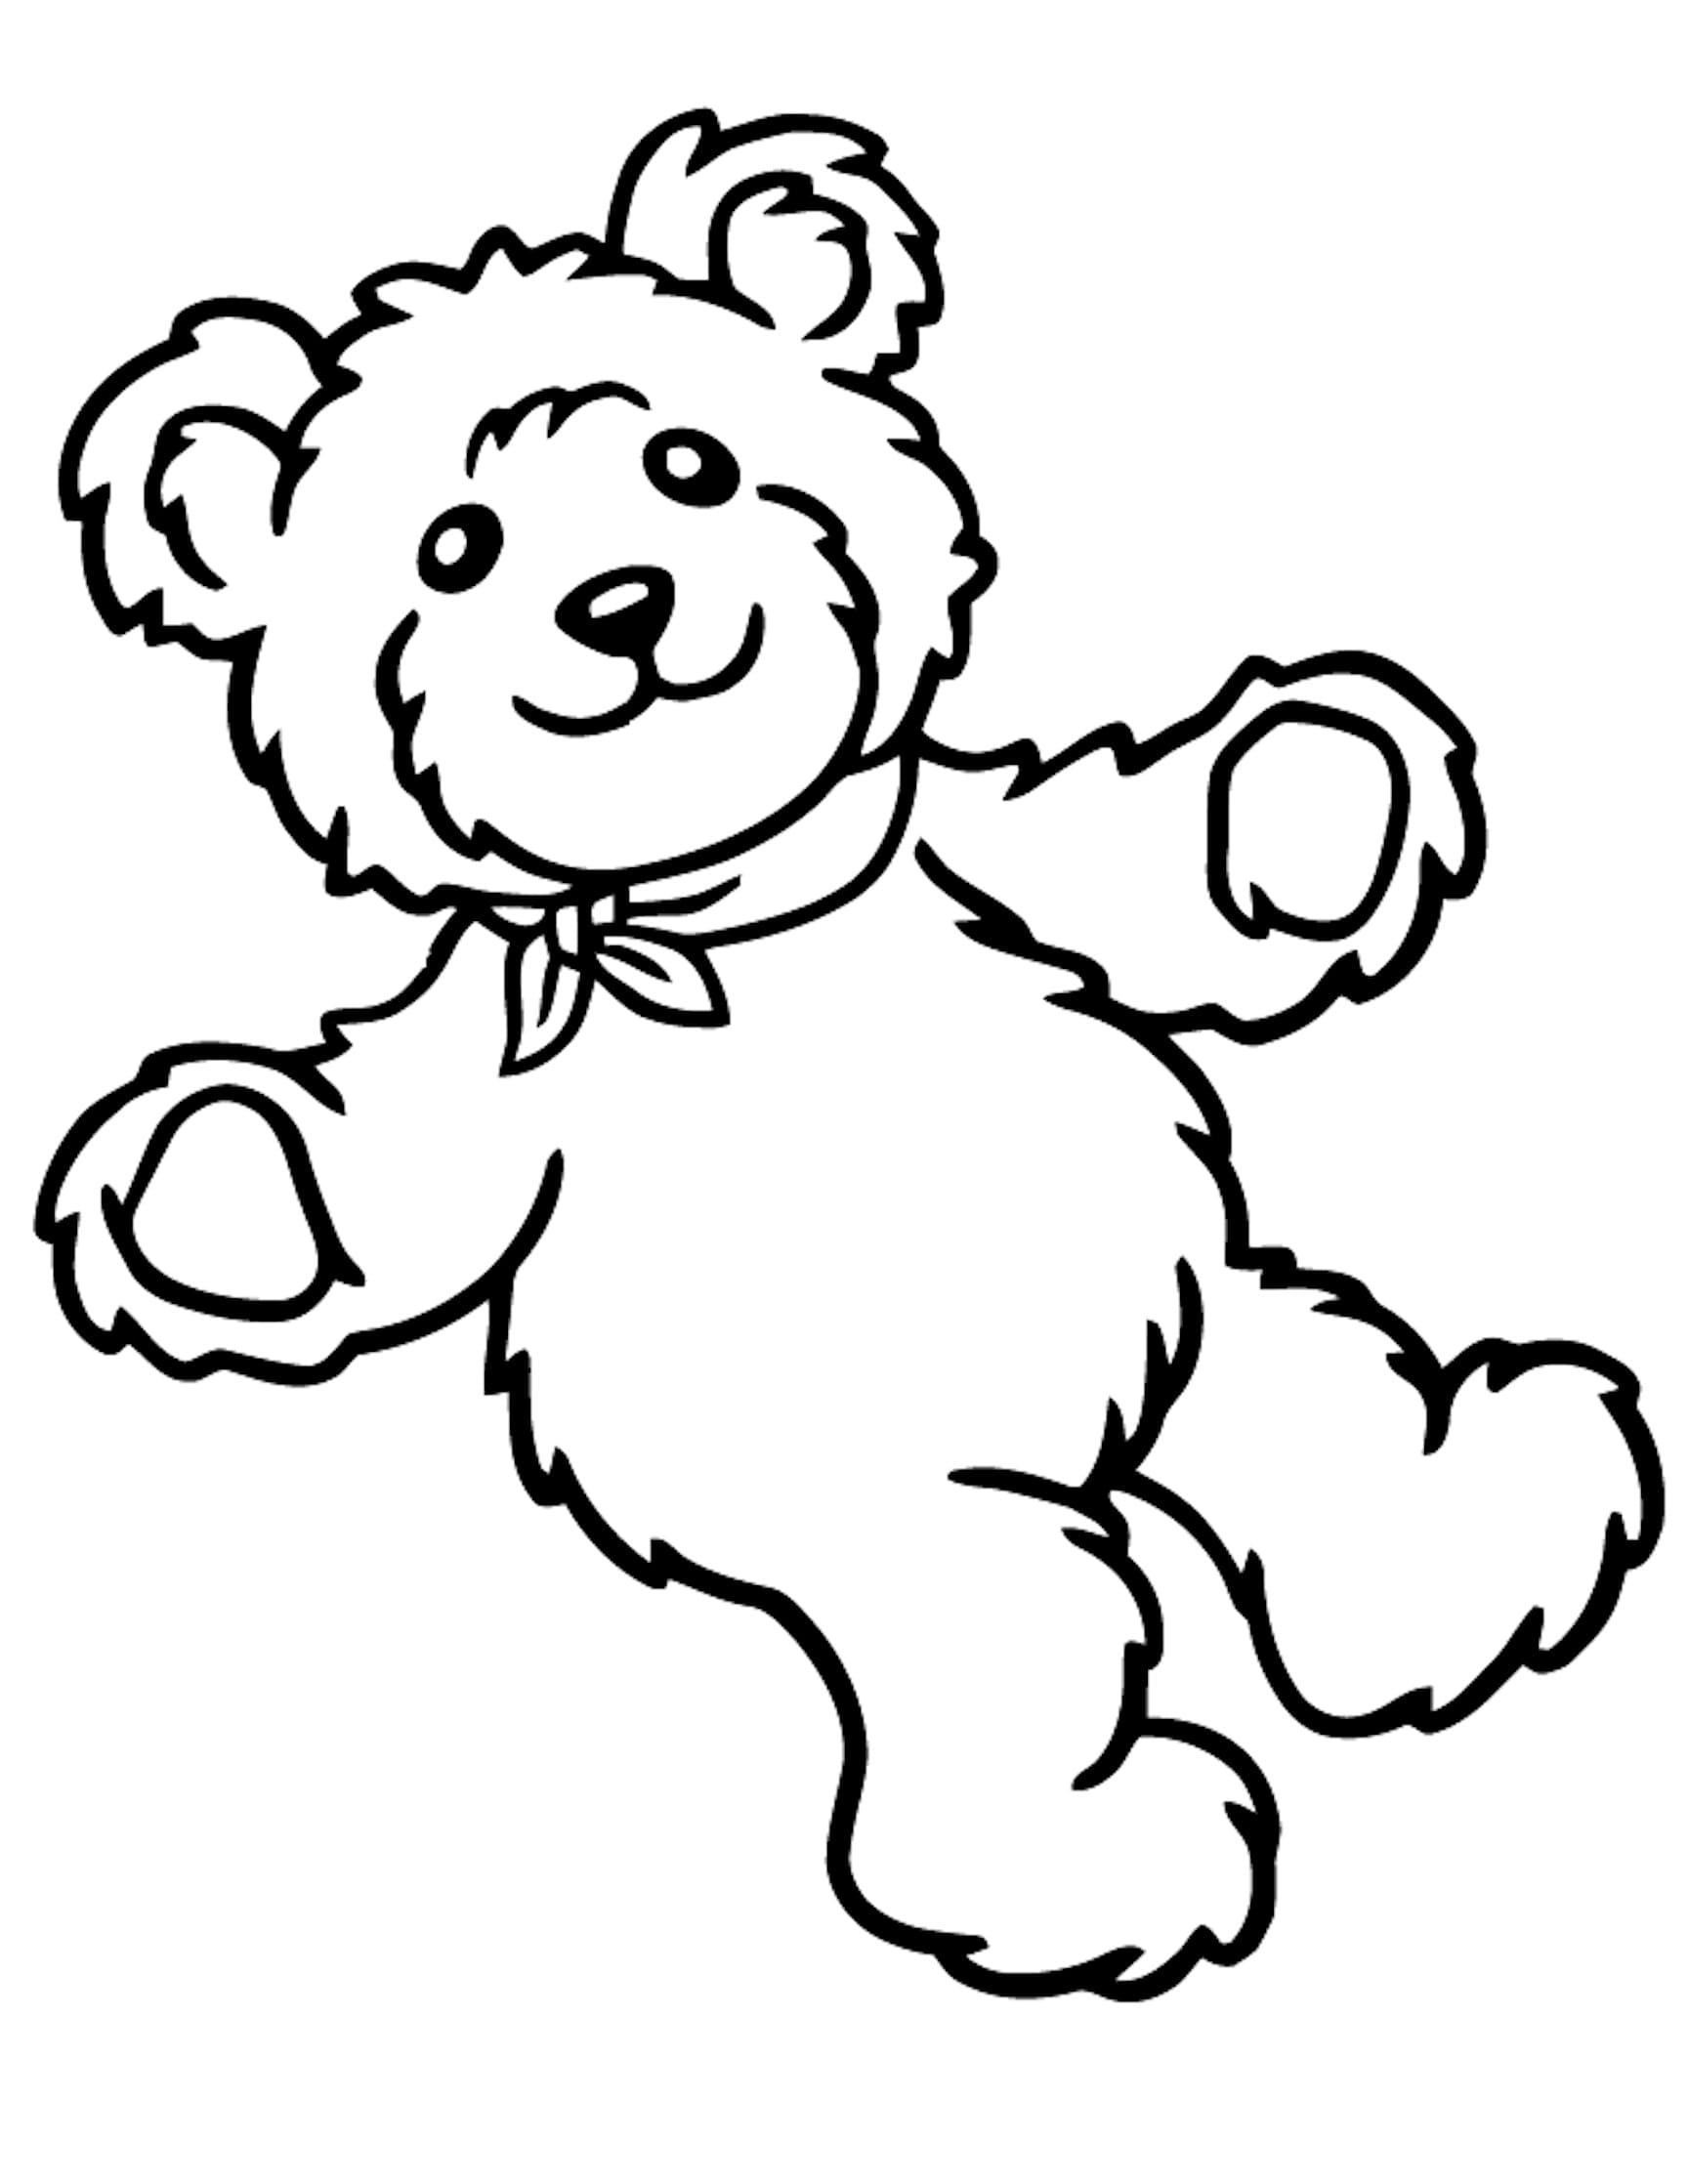 Coloring page Teddy Bears Teddy bear for kids